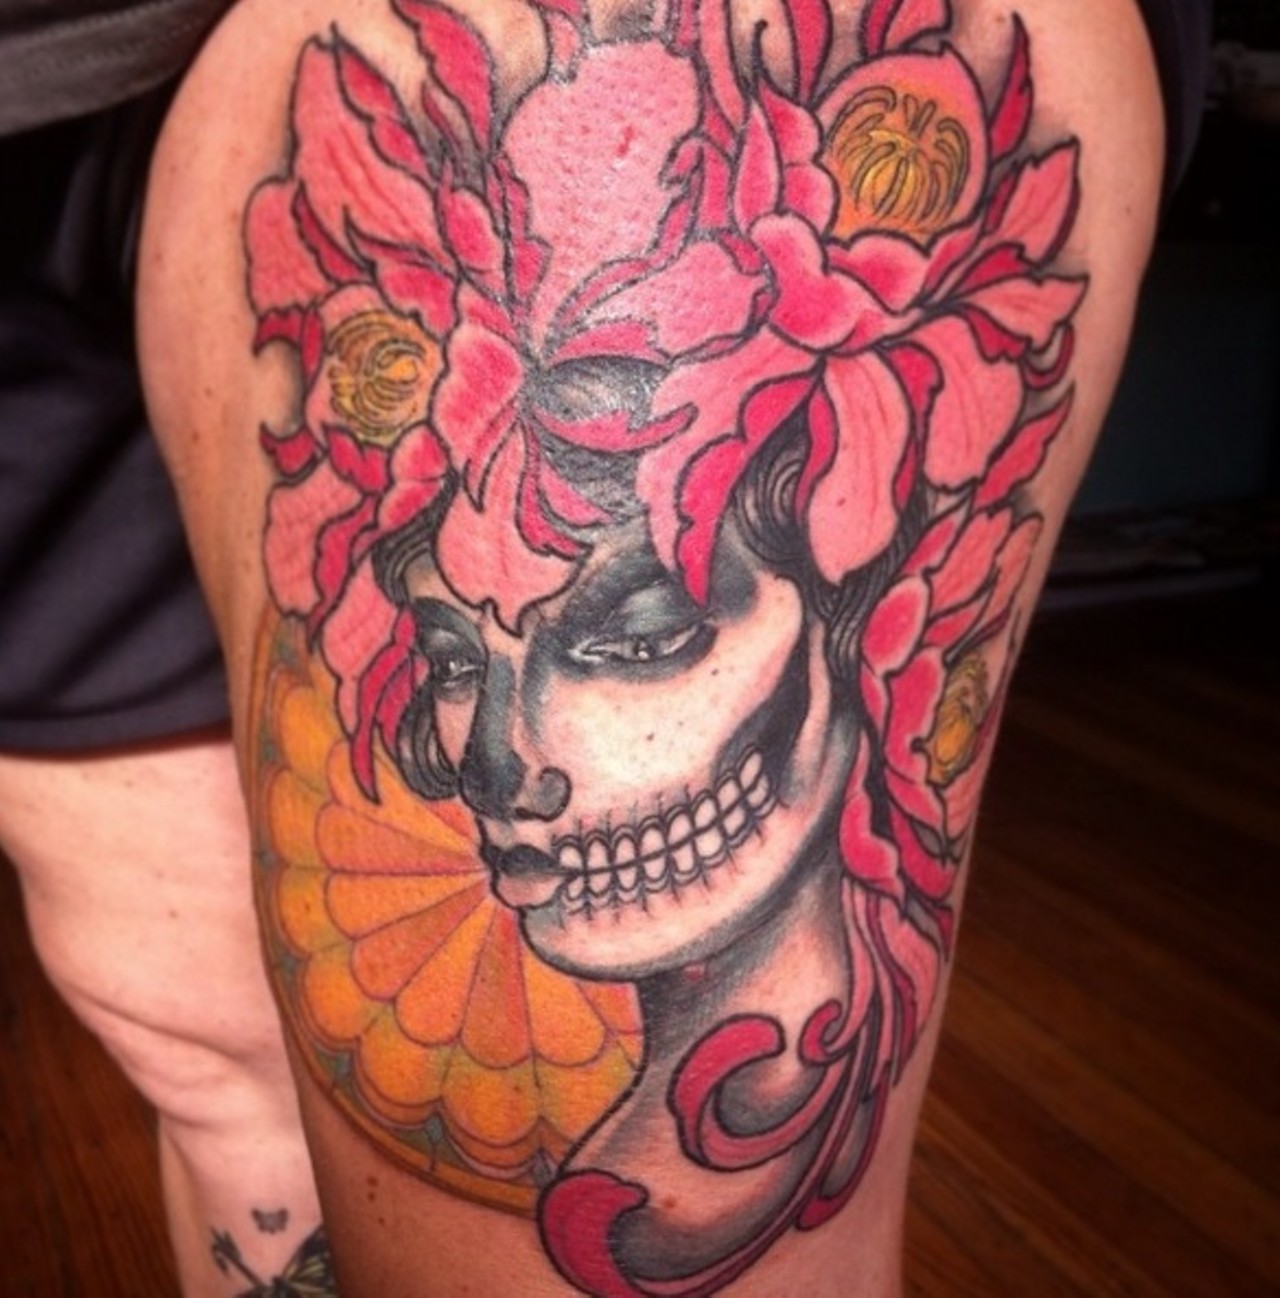 These Are the Best Tattoo Artists of All Time - Florida Tattoo Academy